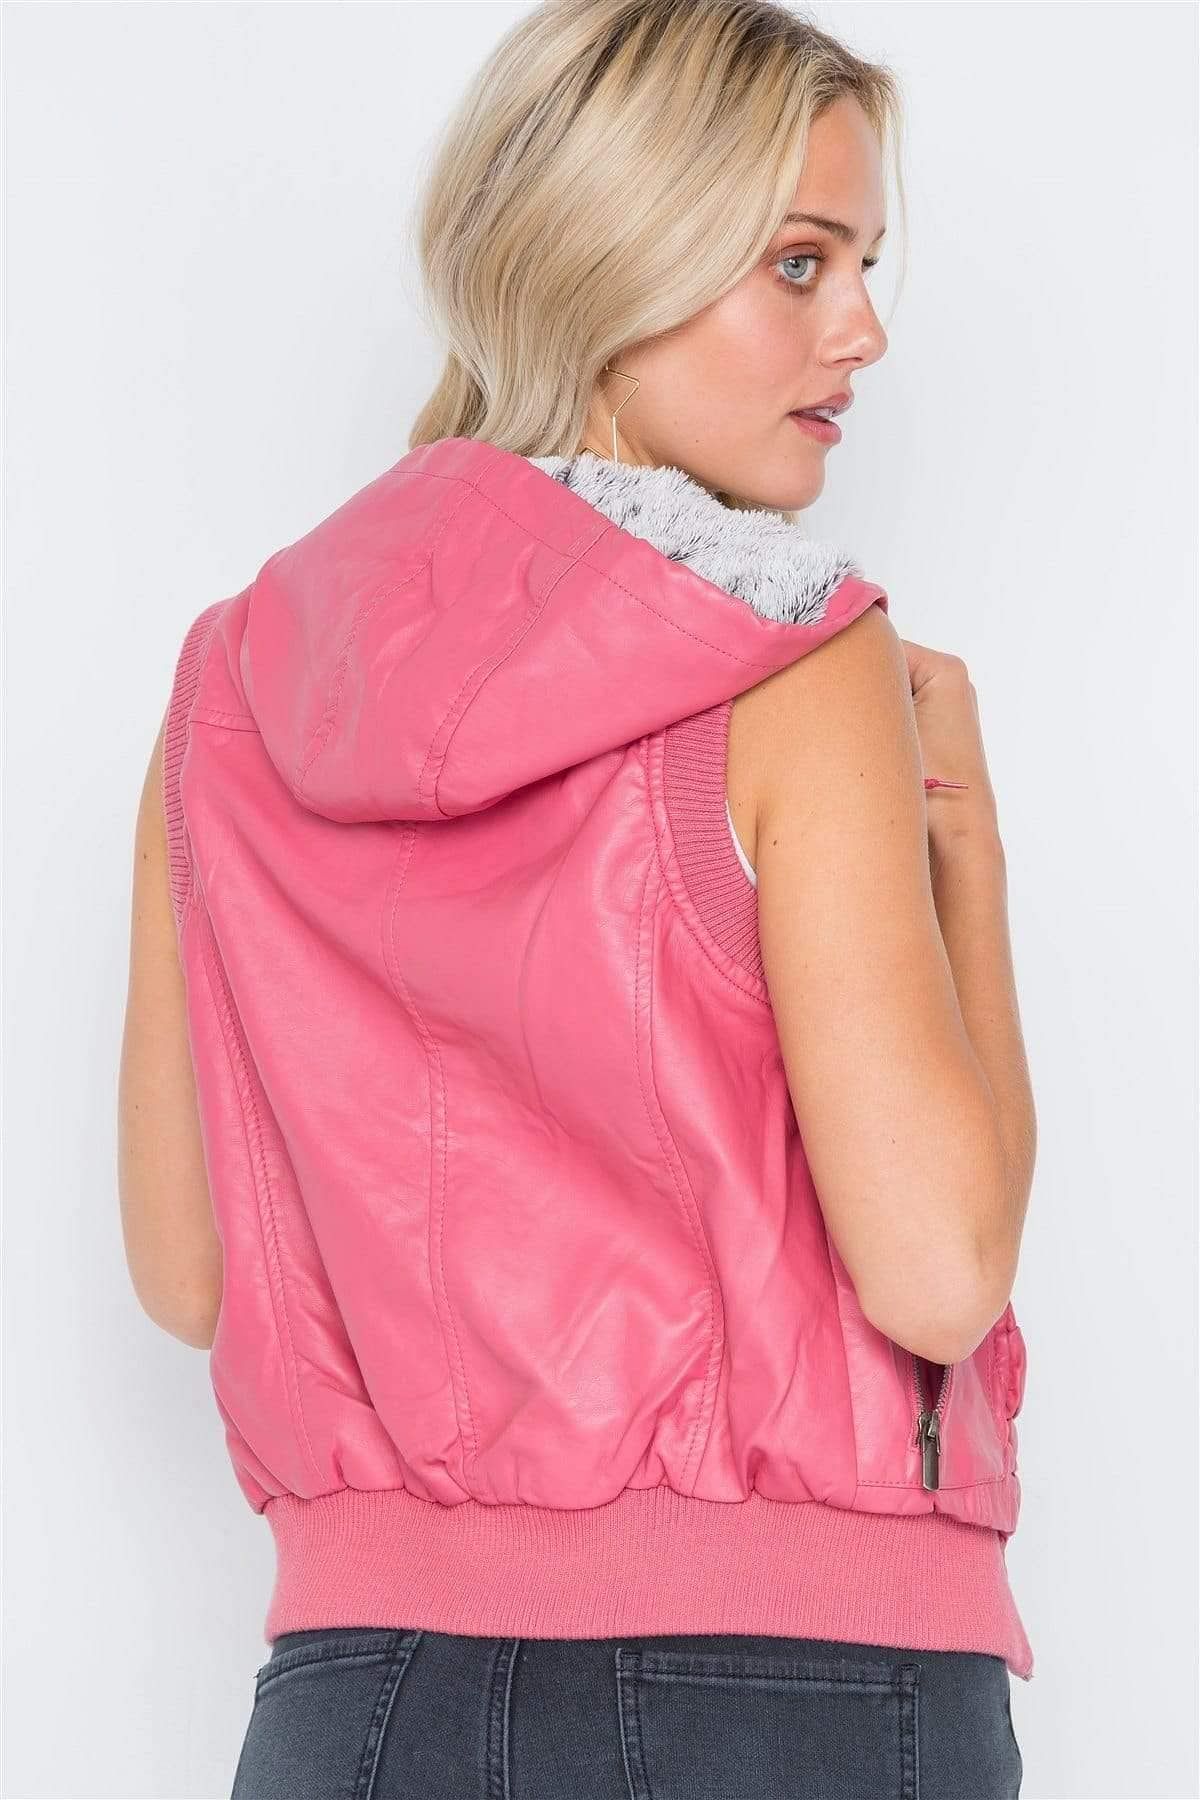 Pink Vegan Leather Shirred Vest - Shopping Therapy vest